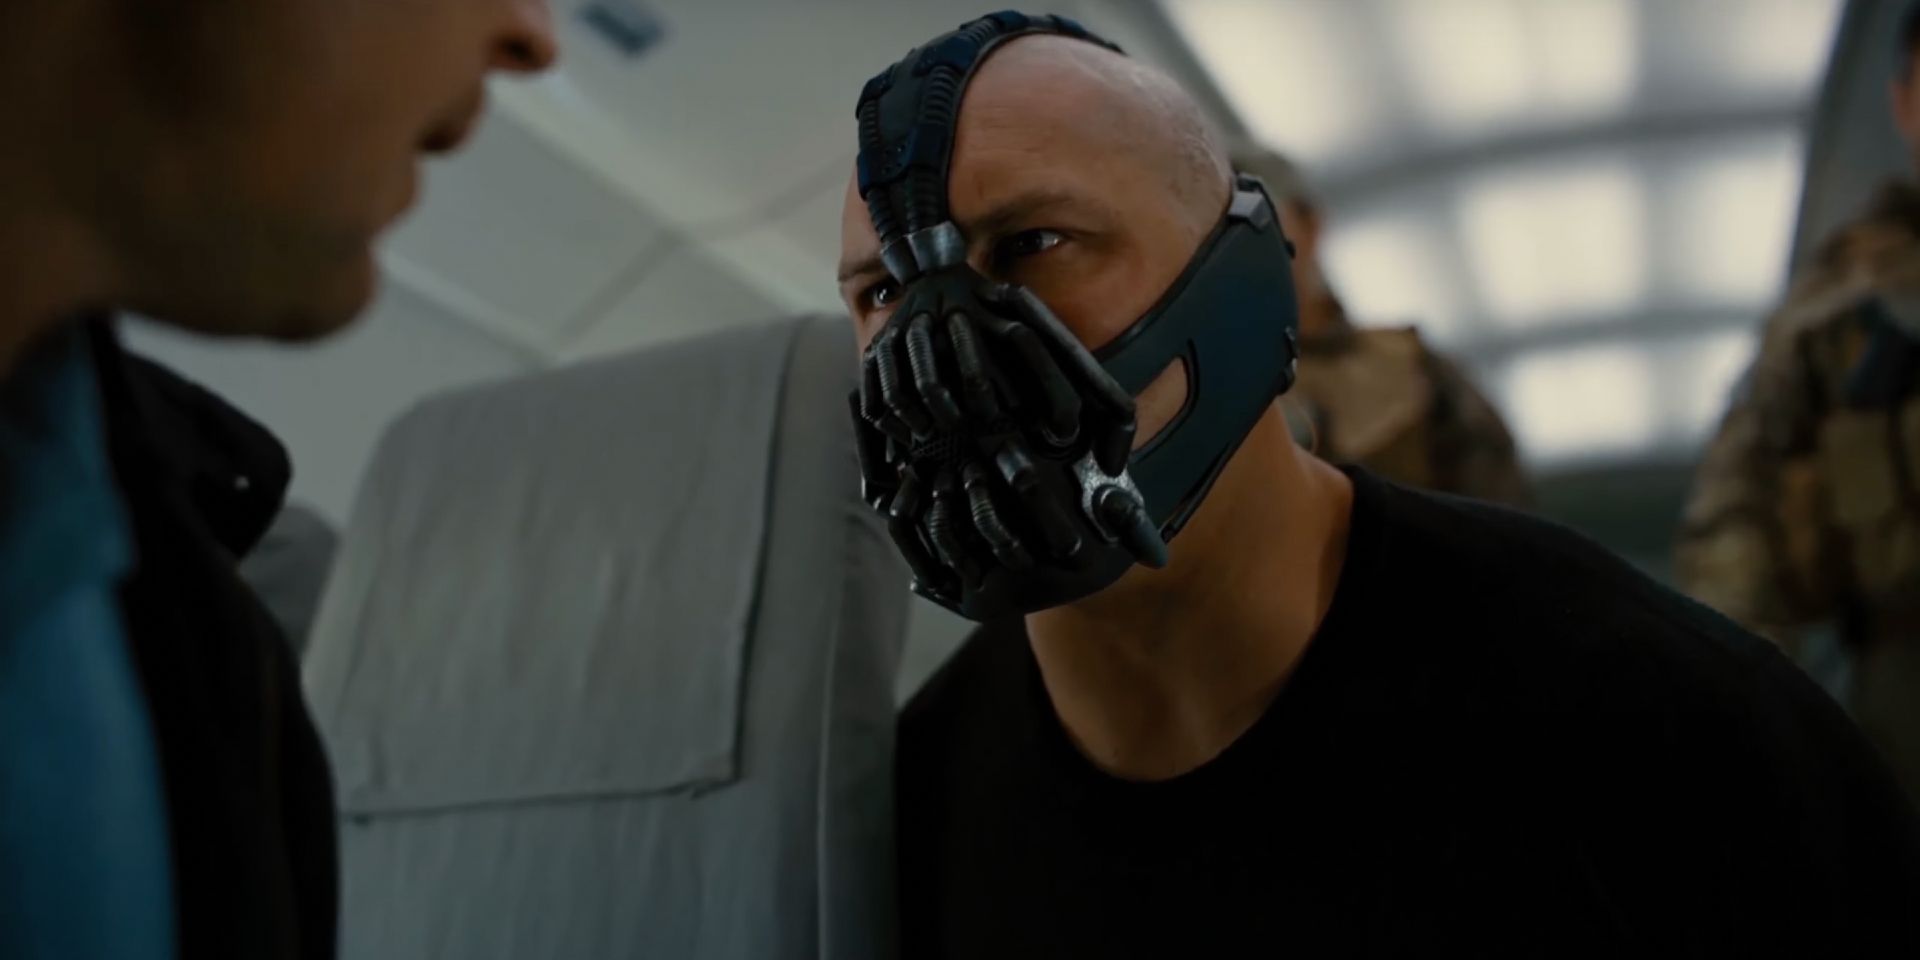 A masked mercenary glares into the eyes of a CIA agent on a plane. 